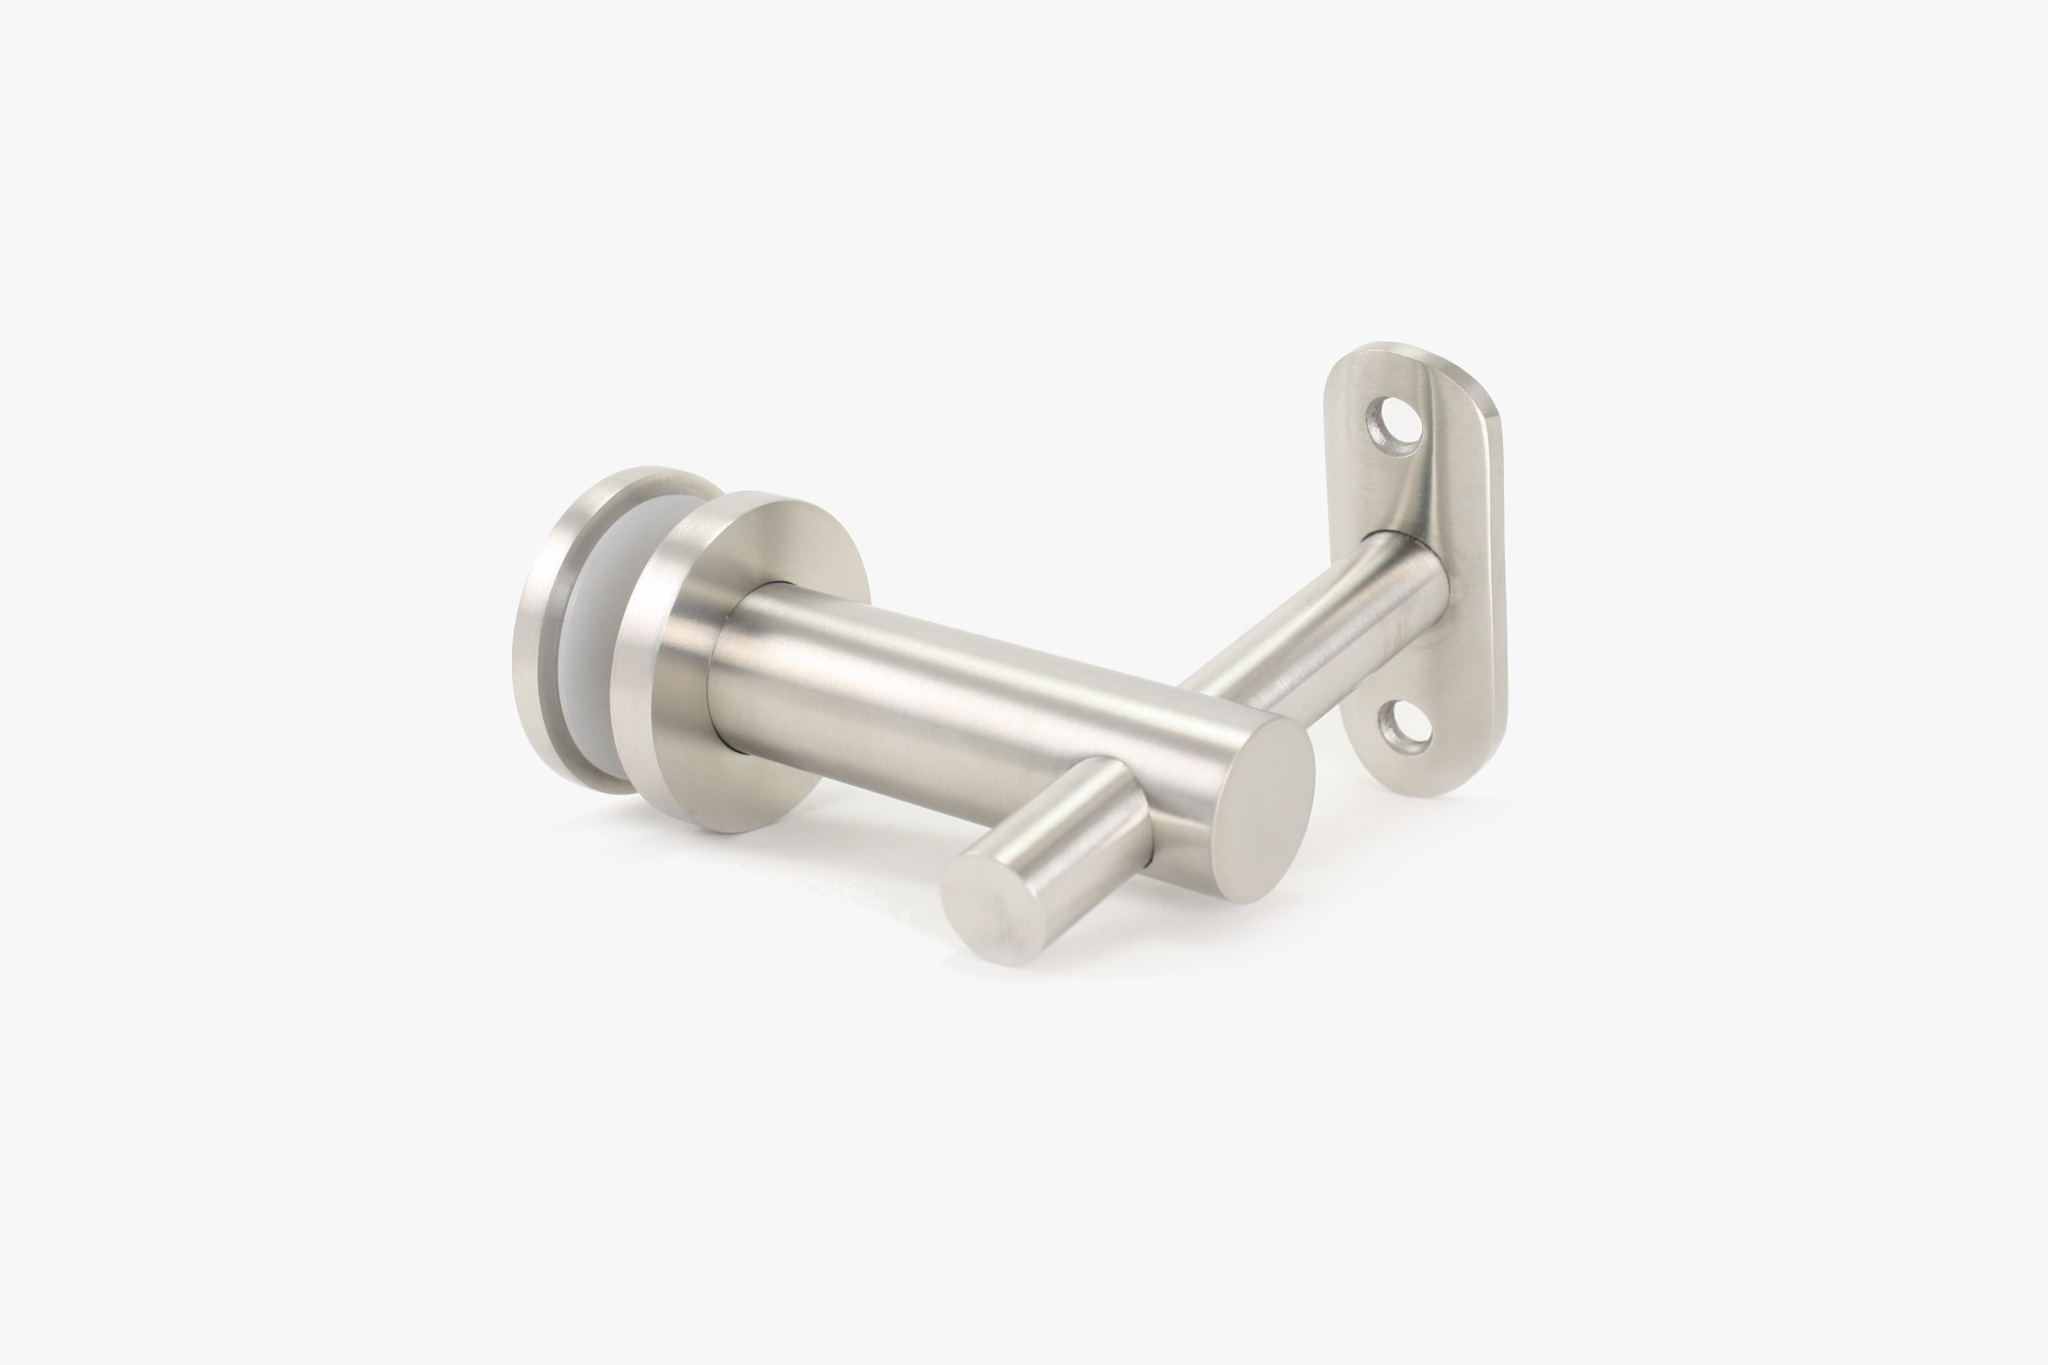 Adjustable glass to round tube handrail bracket - Brushed stainless steel